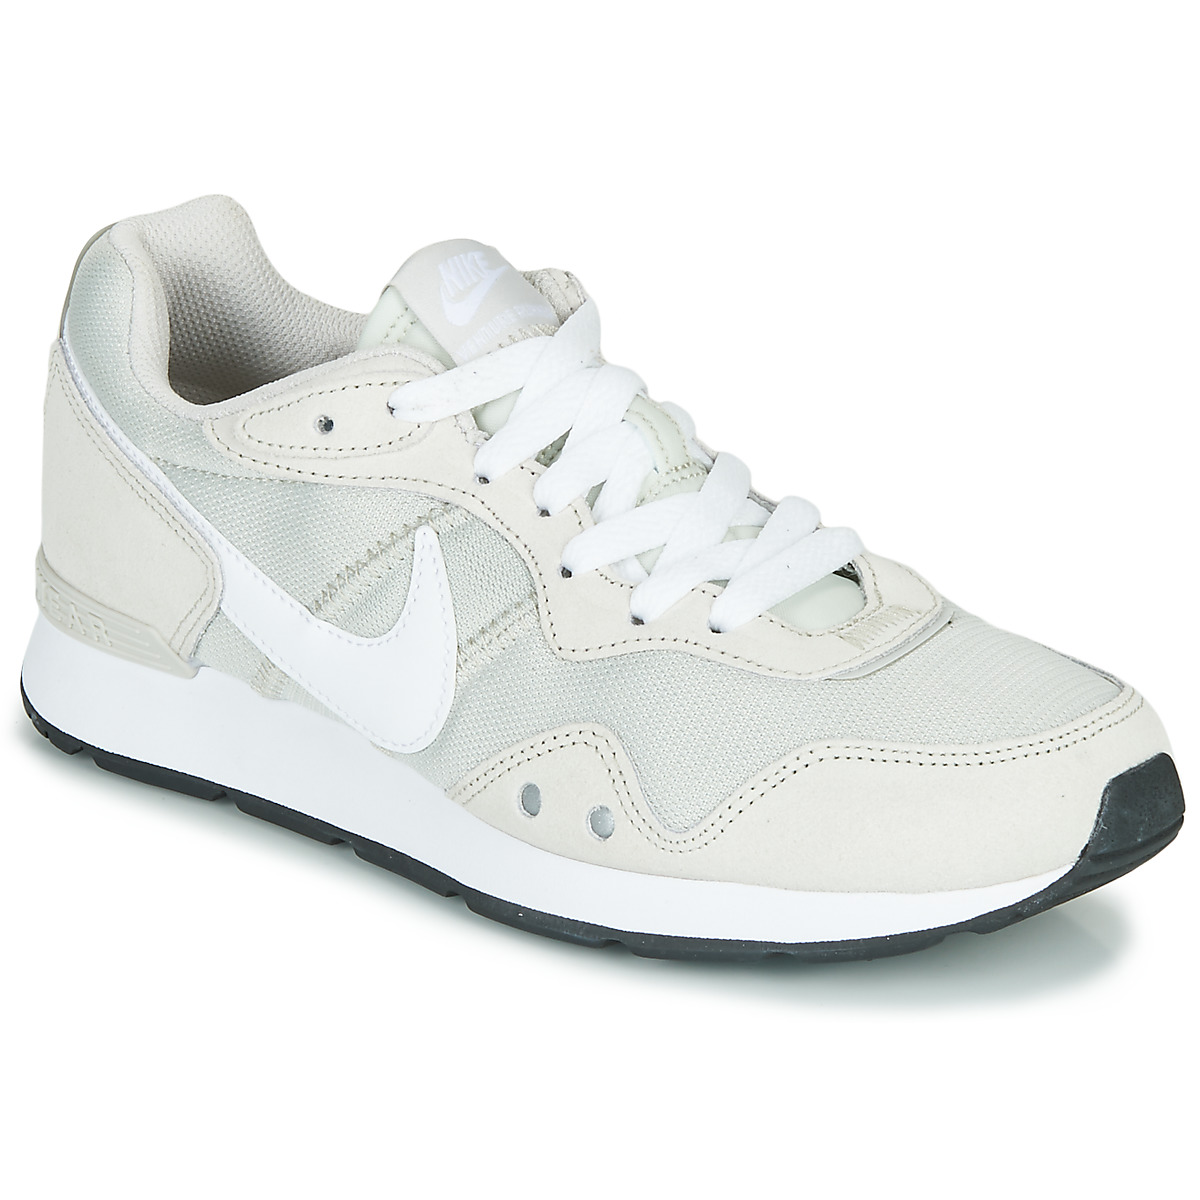 Nike VENTURE RUNNER Beige / White - Free delivery | NET ! - Shoes Low top trainers Women